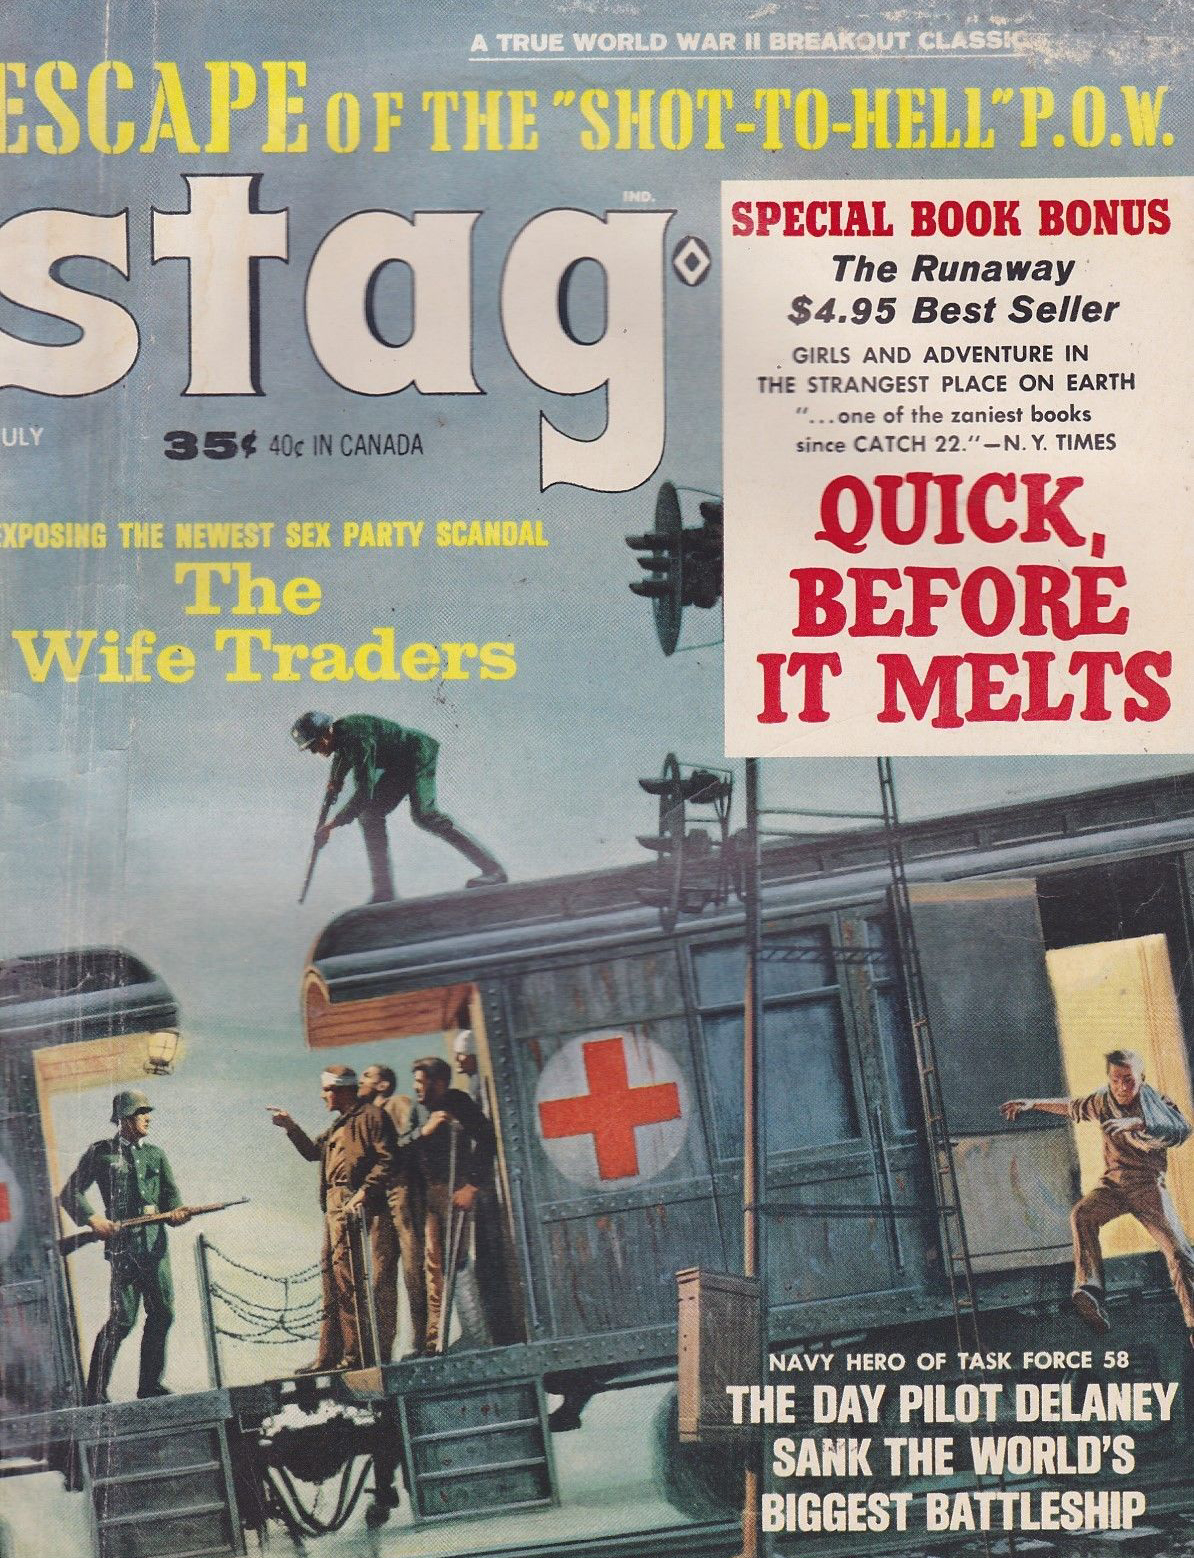 Stag July 1964 magazine back issue Stag magizine back copy Stag July 1964 Magazine for Men Adult Back Issue Published by Leeds Publishing Corp. Escape Of The Shot - To - Hell P.O.W..